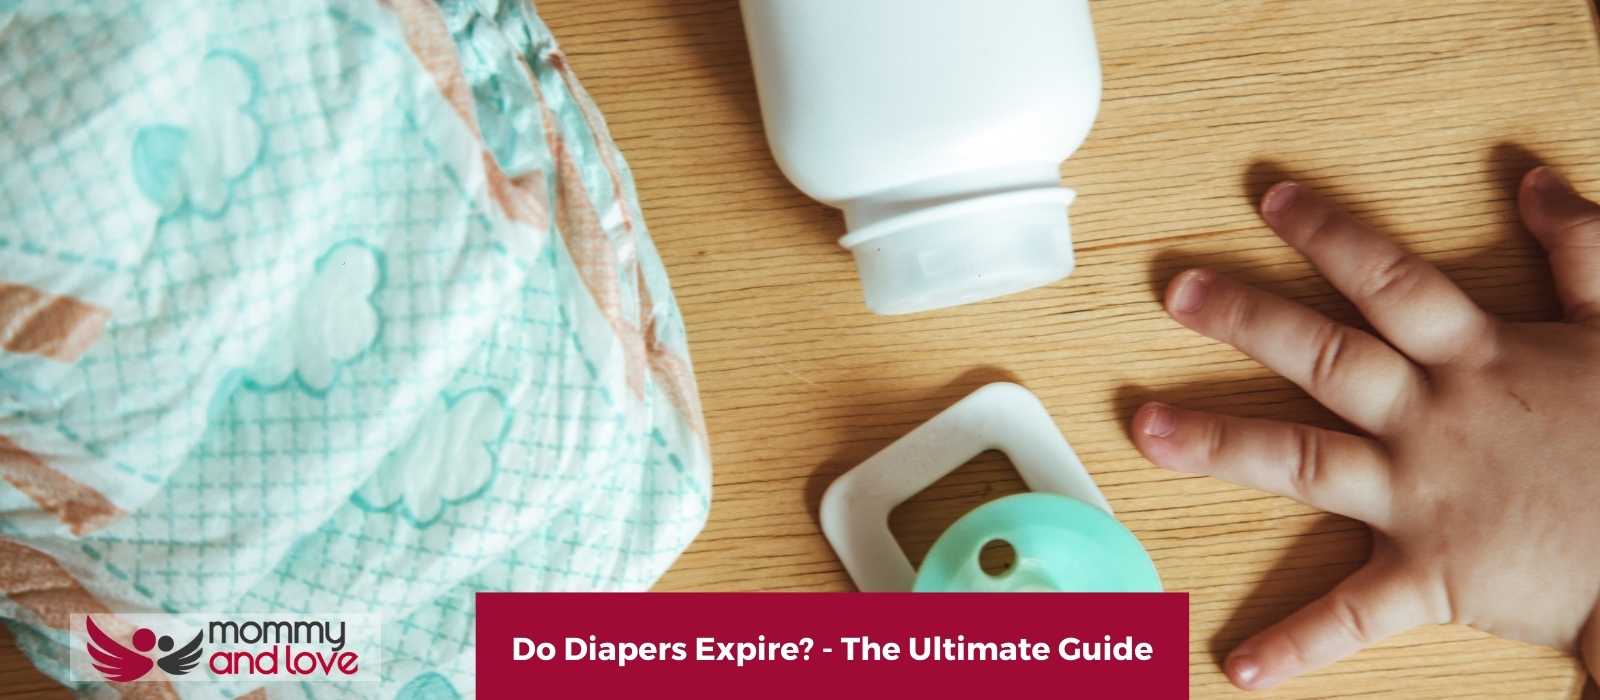 Do Diapers Expire - The Ultimate Guide